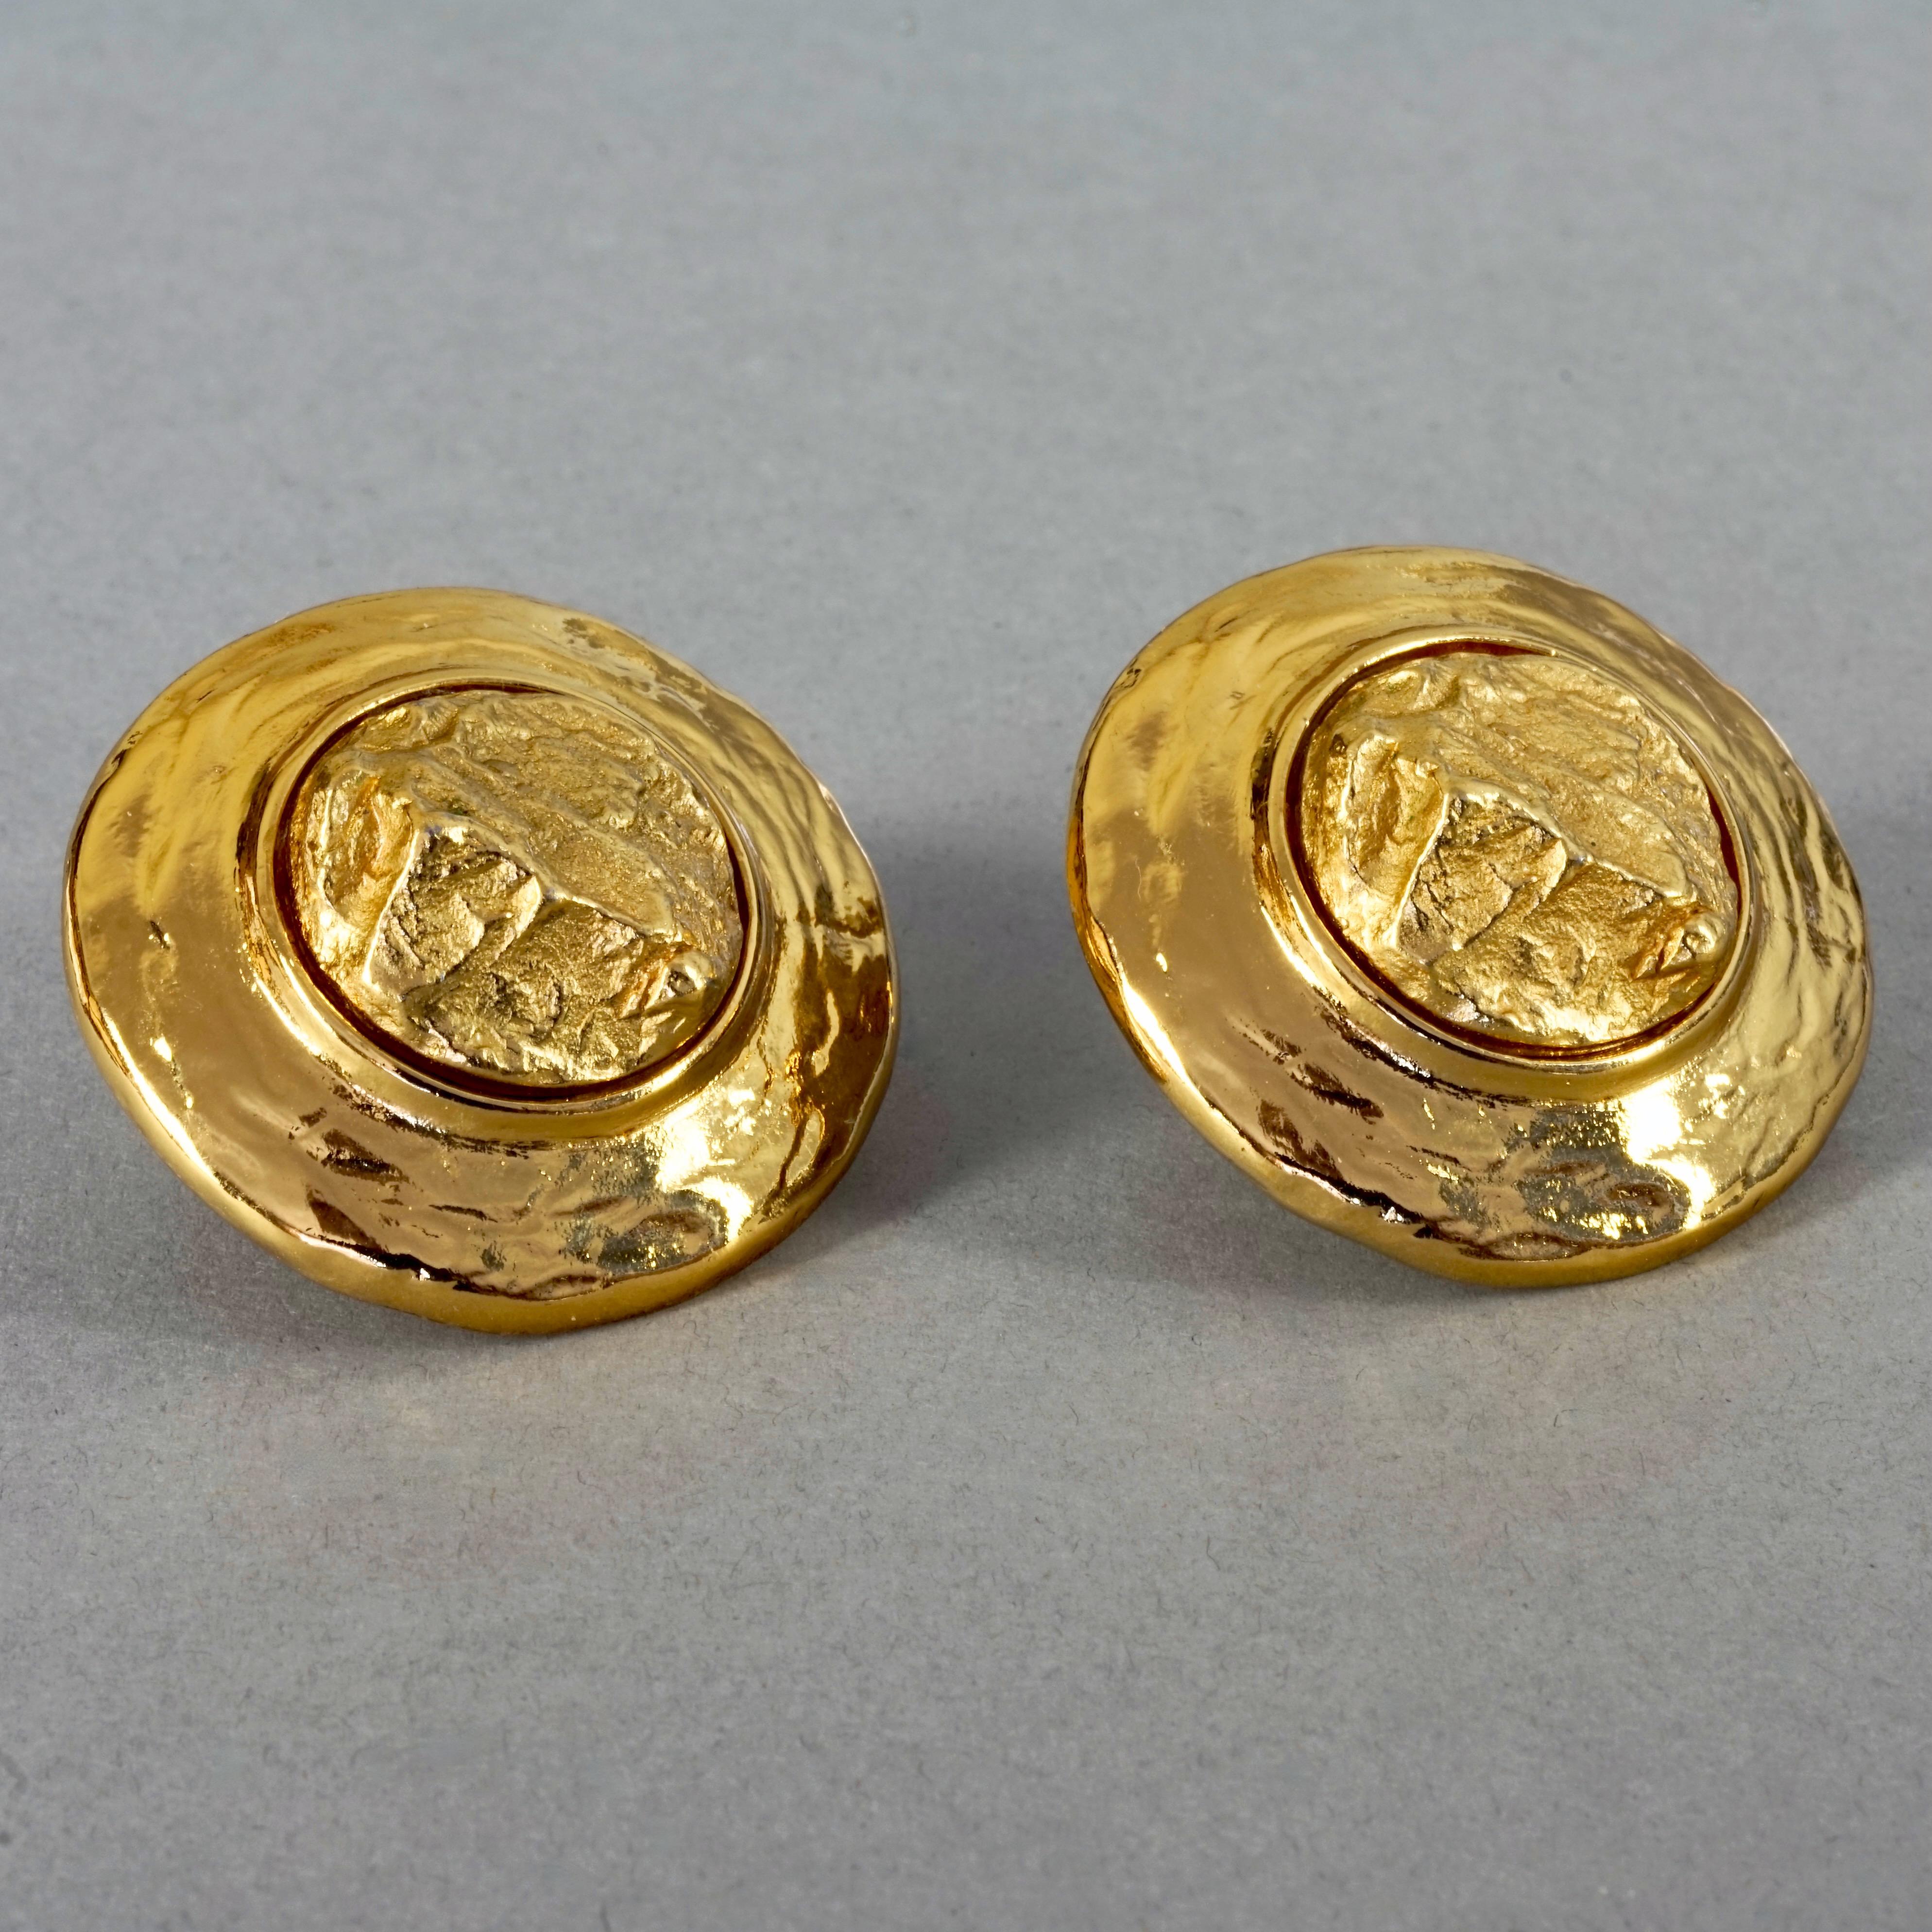 Vintage YVES SAINT LAURENT Ysl Textured Gold Round Earrings For Sale 3